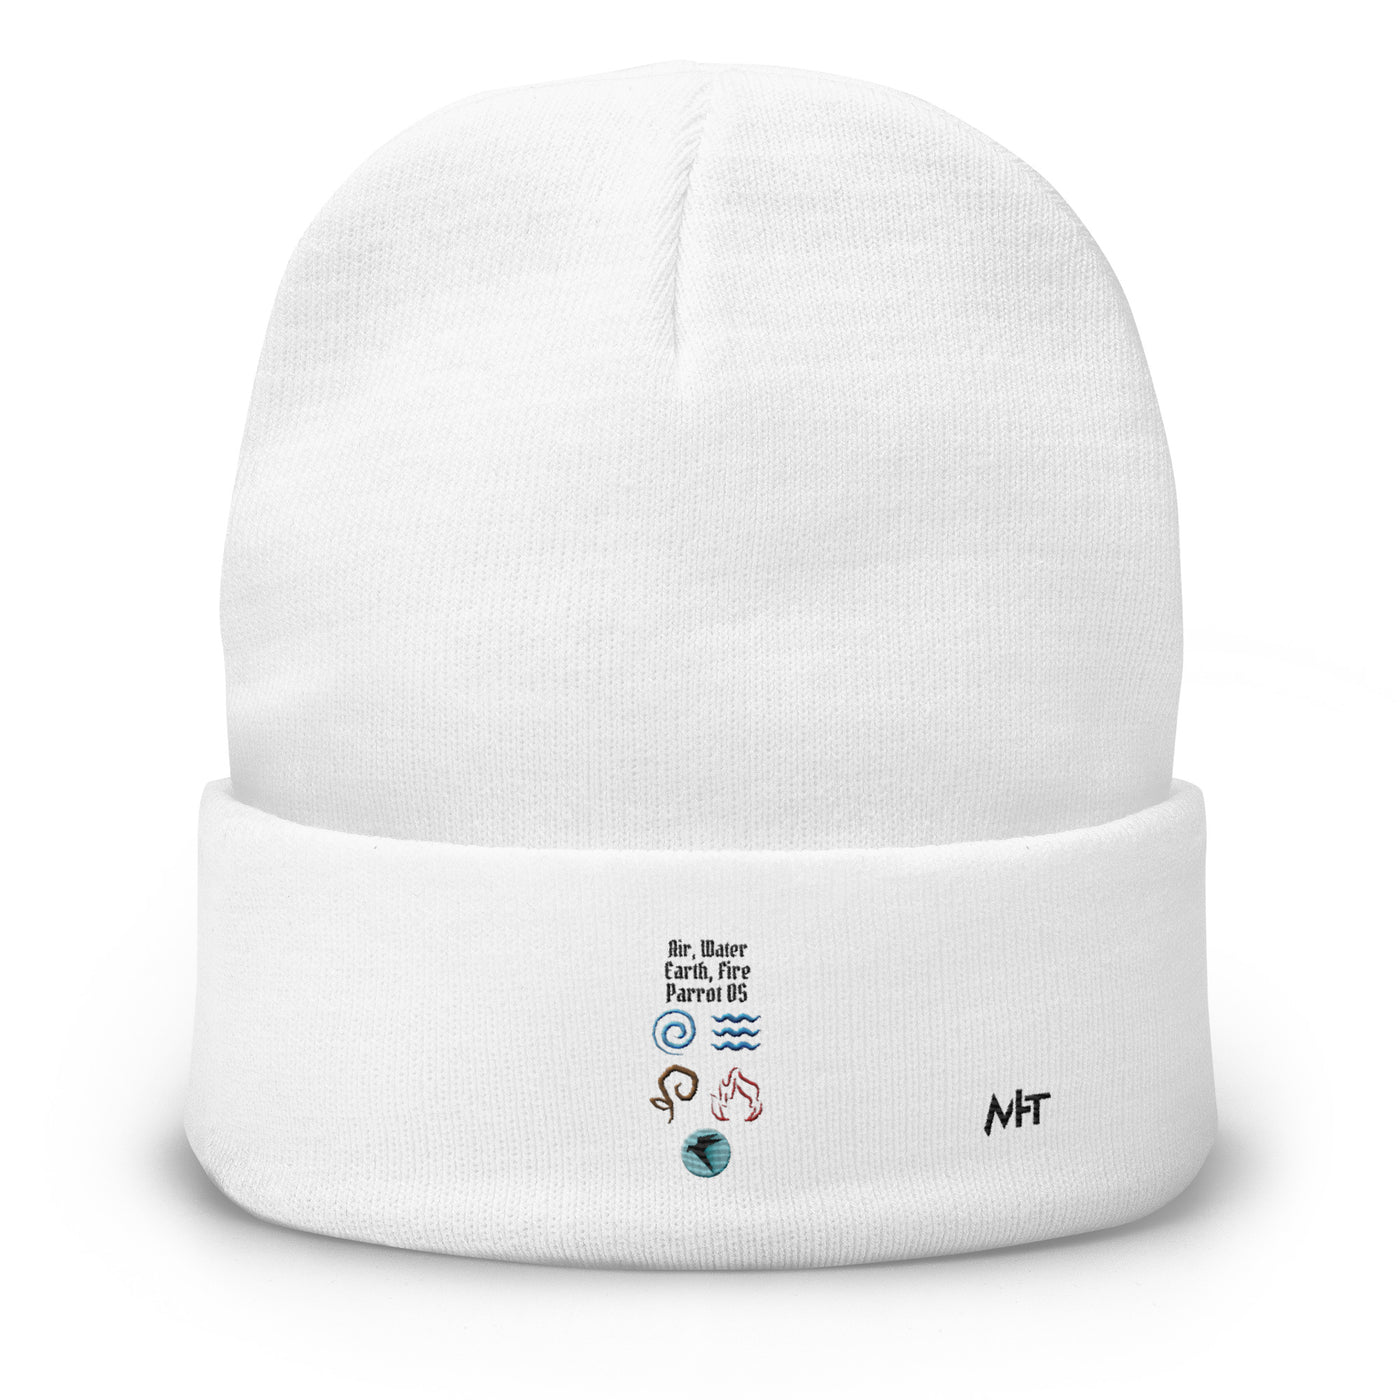 Air, Water, Earth, Fire, Parrot OS - Embroidered Beanie